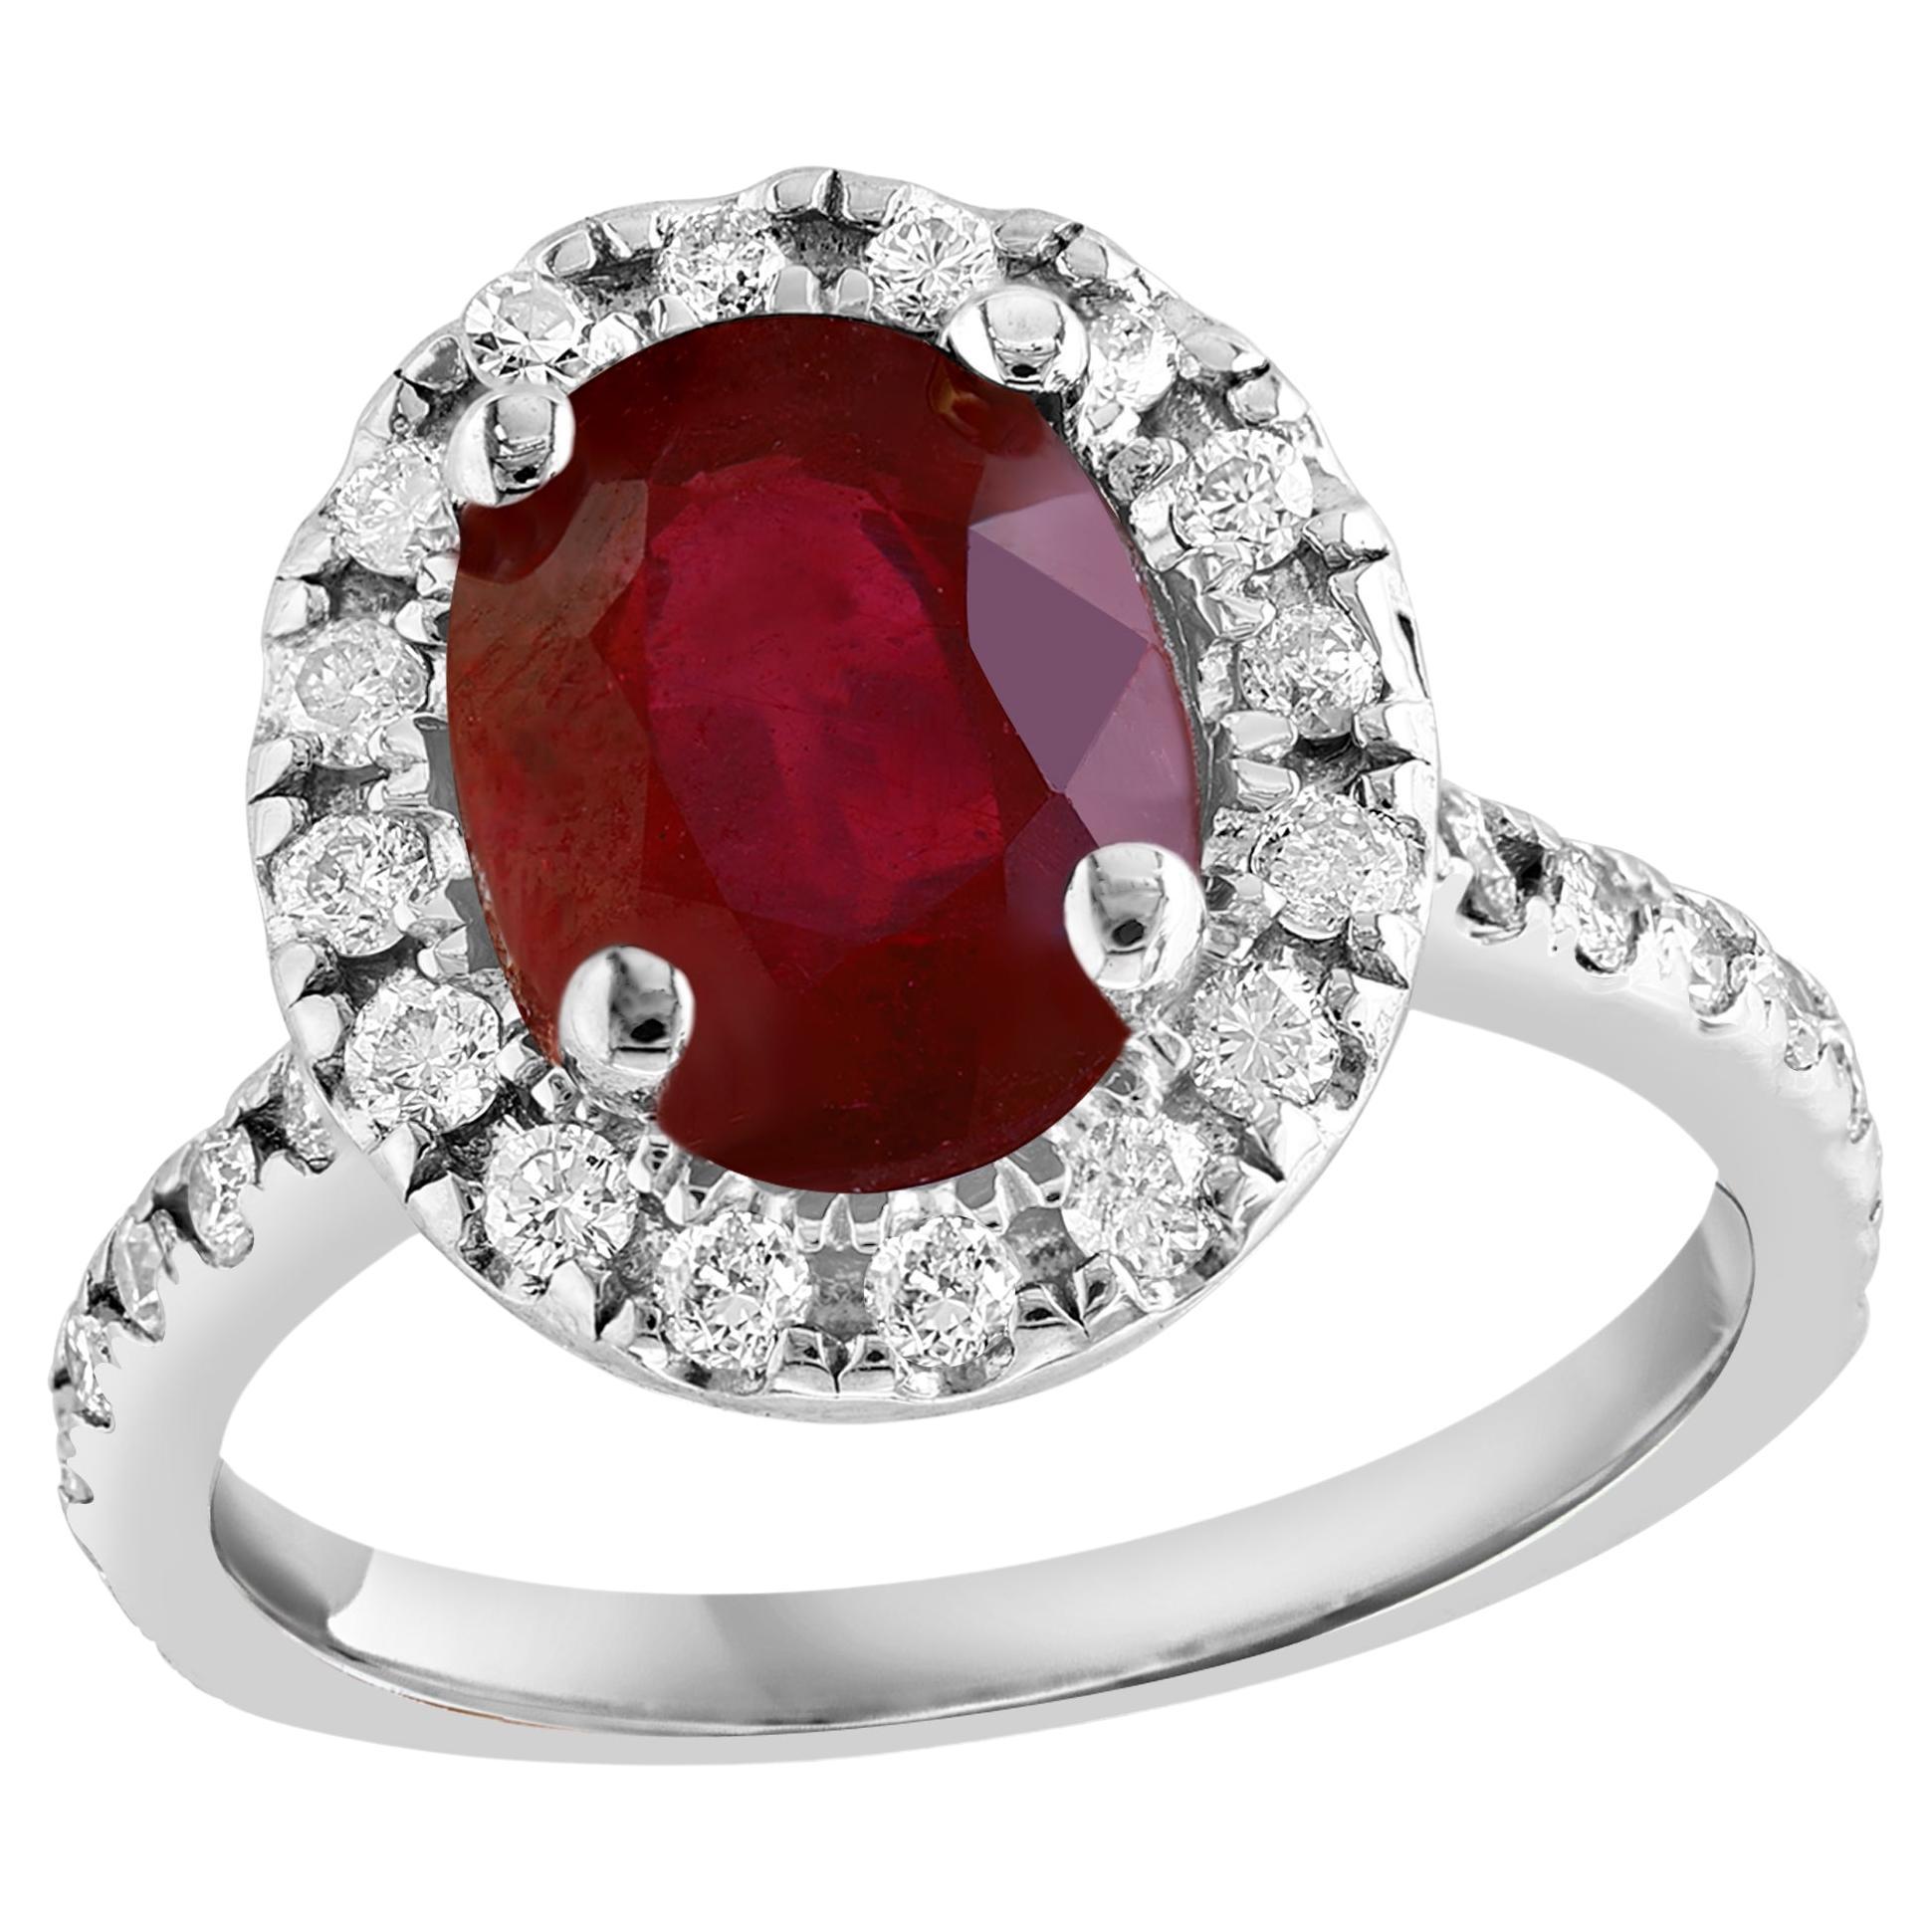 3 Carat Oval Treated Ruby & 1.25 ct Diamond Ring 14 Karat White Gold Size 6 For Sale